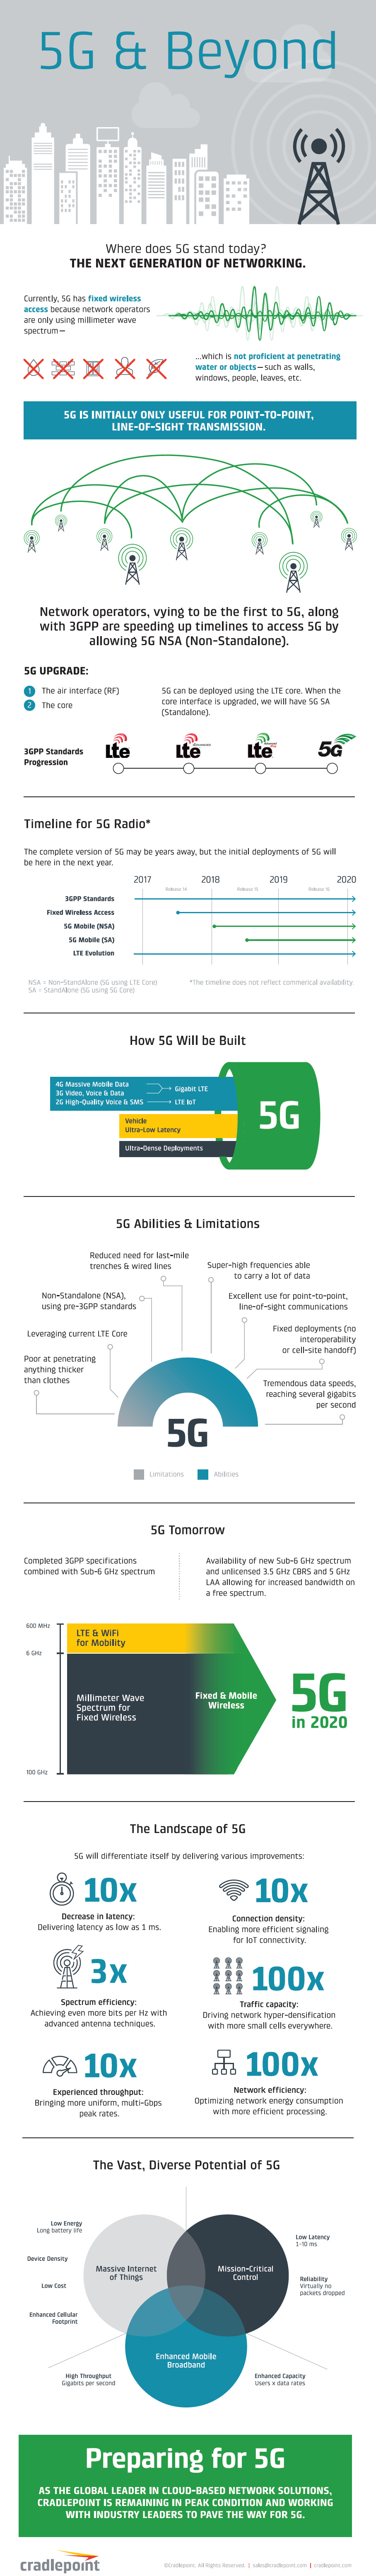 5G: The Next Generation of Mobile Connectivity